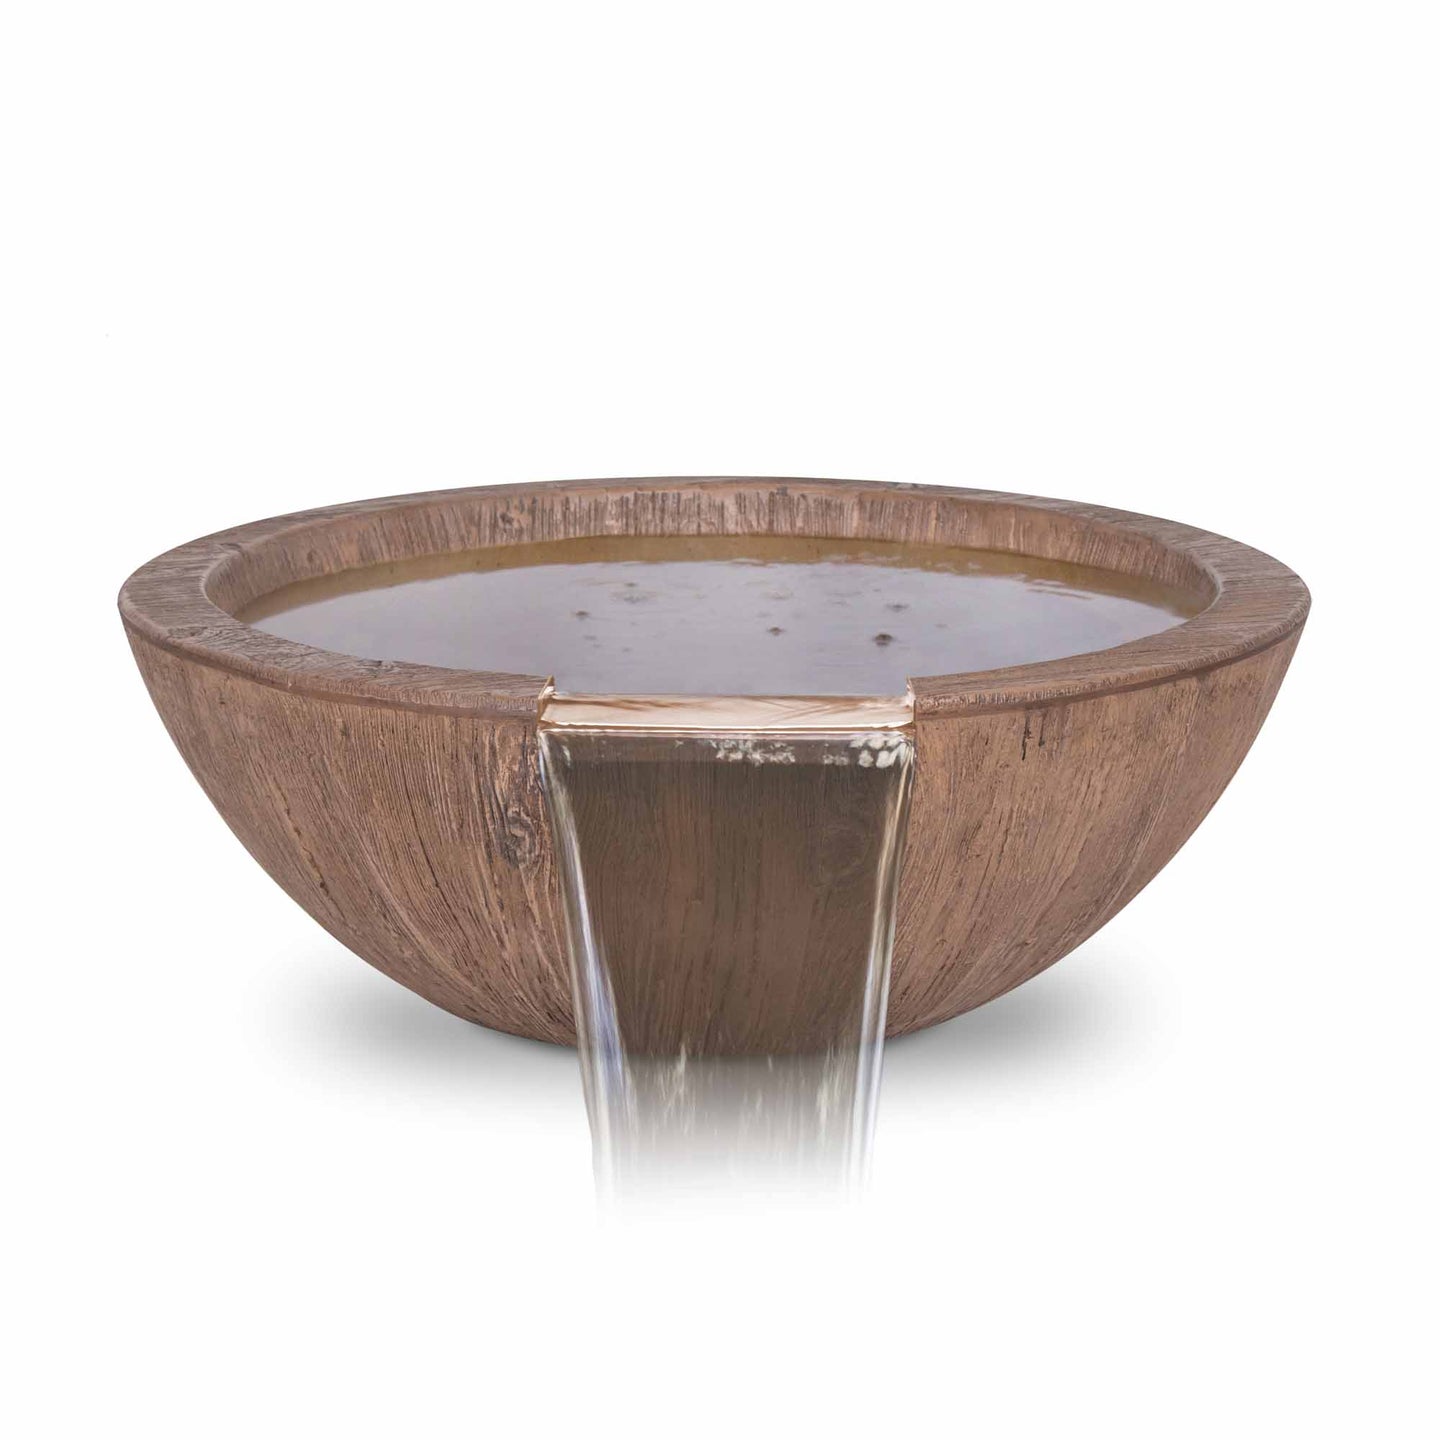 The Outdoor Plus Sedona Wood Grain Concrete Water Bowl + Free Cover